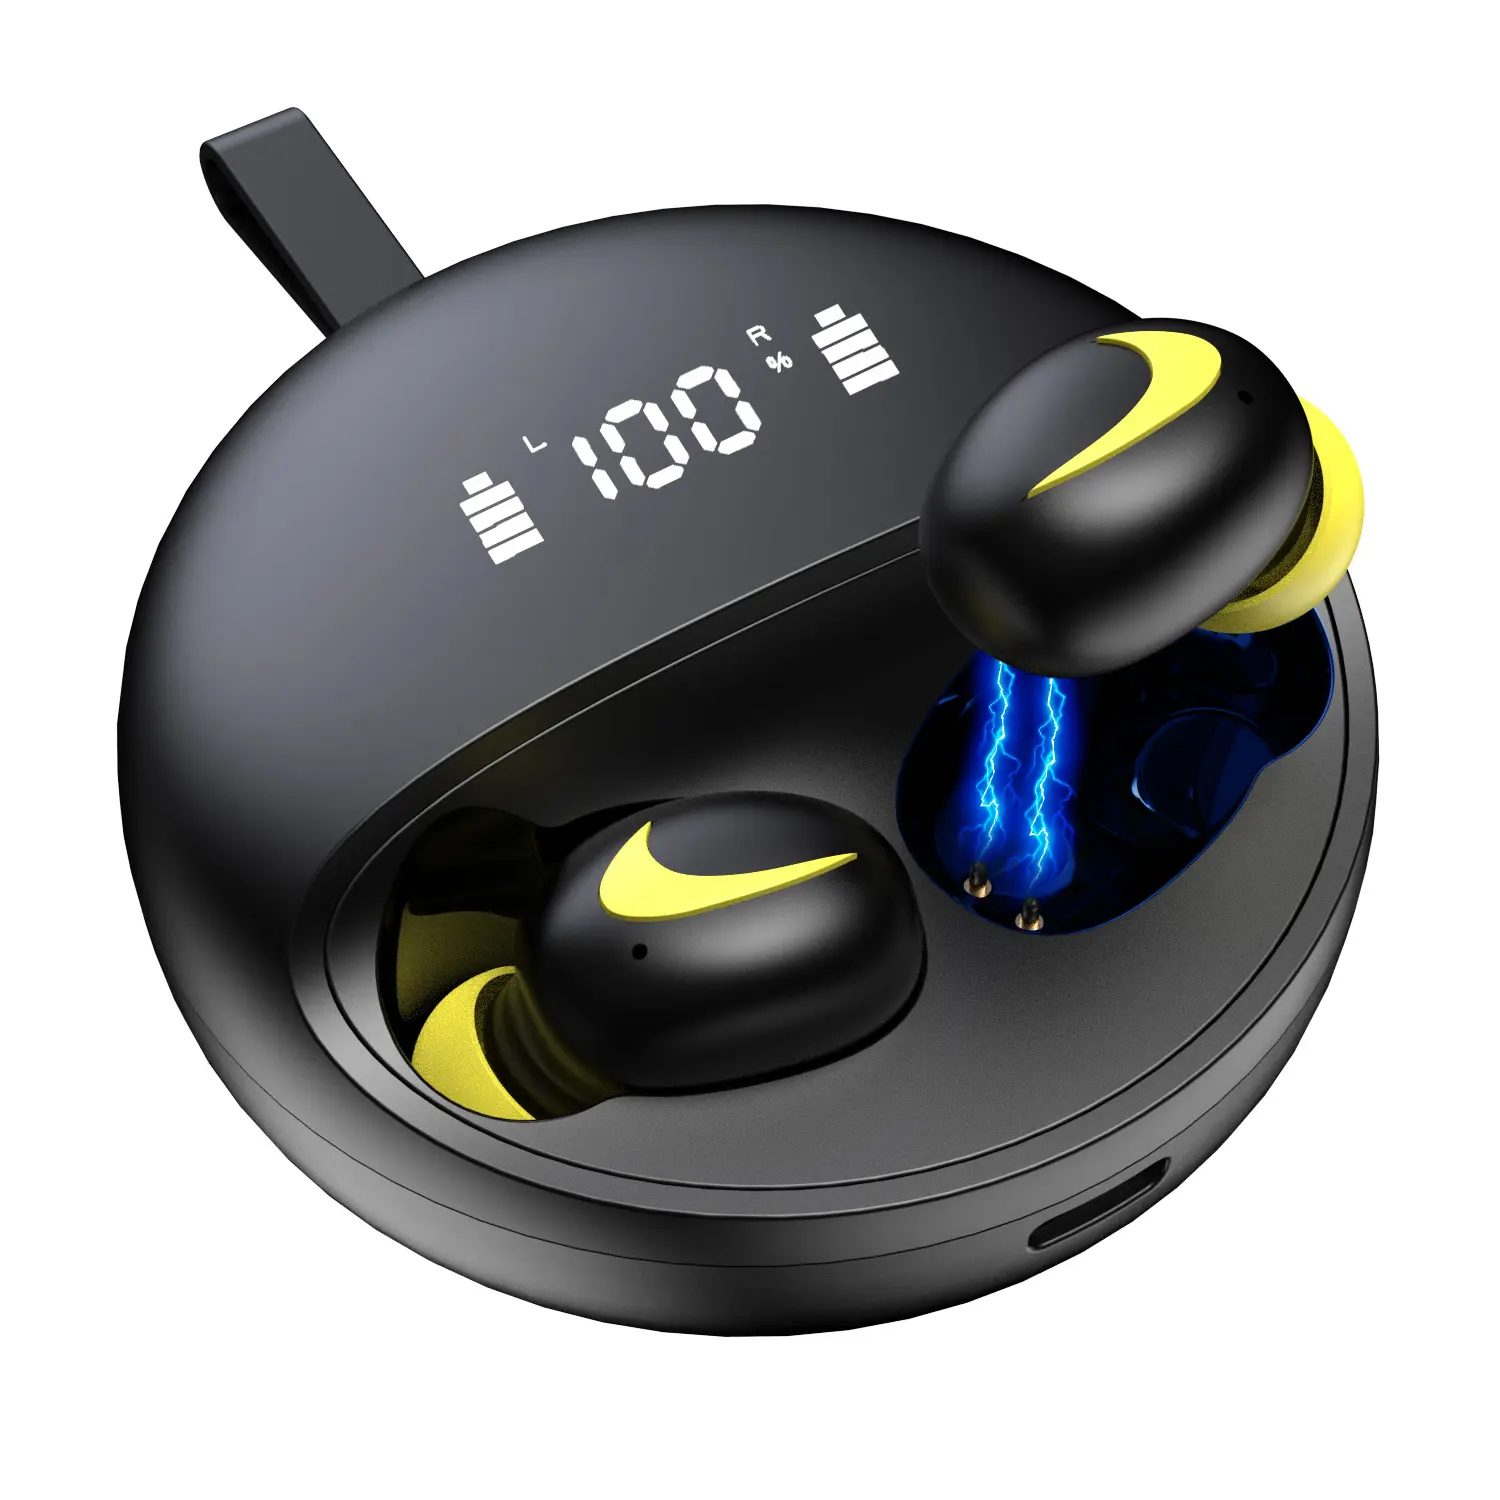 Amazon Hot Tws Wireless Earphone Earbuds Gaming Sport Touch Control Headset Airbuds With Mic